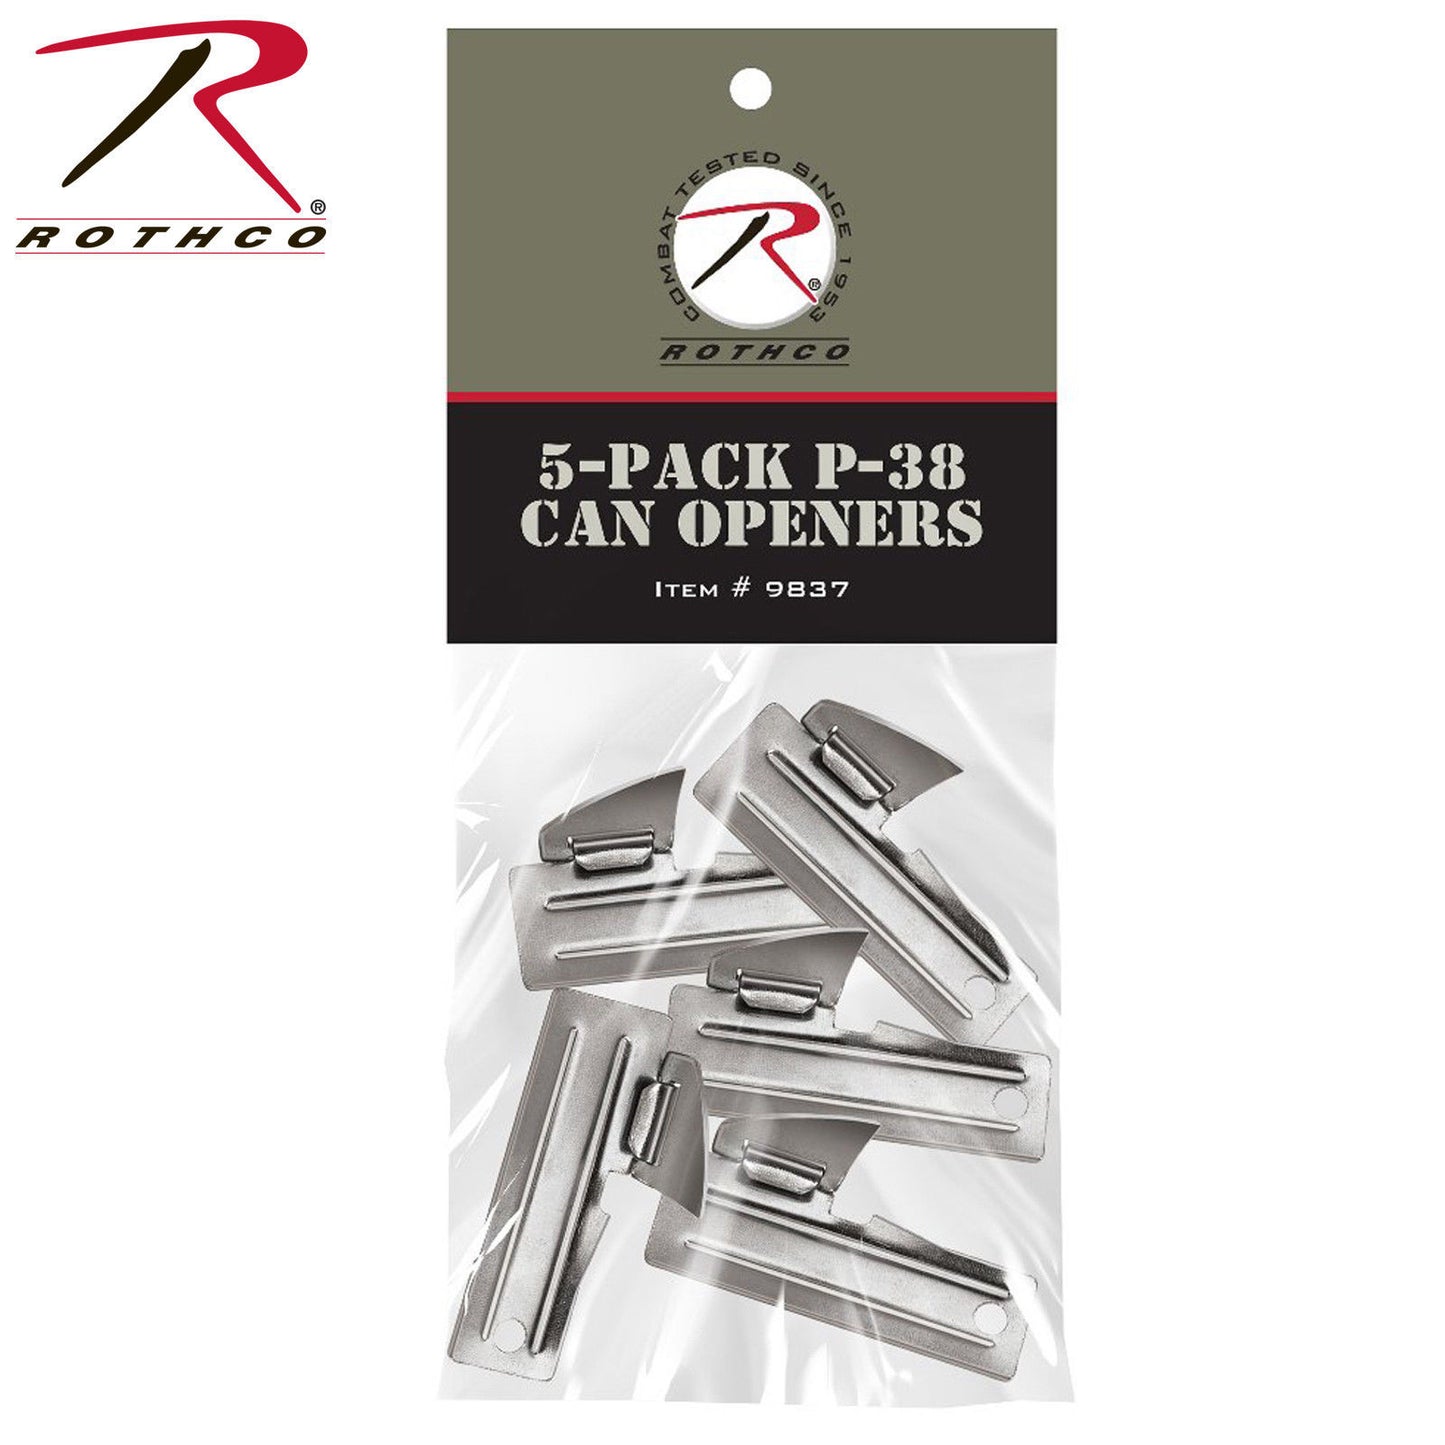 Rothco G.I. Type 5-Pack P38 Can Openers - Can Openers